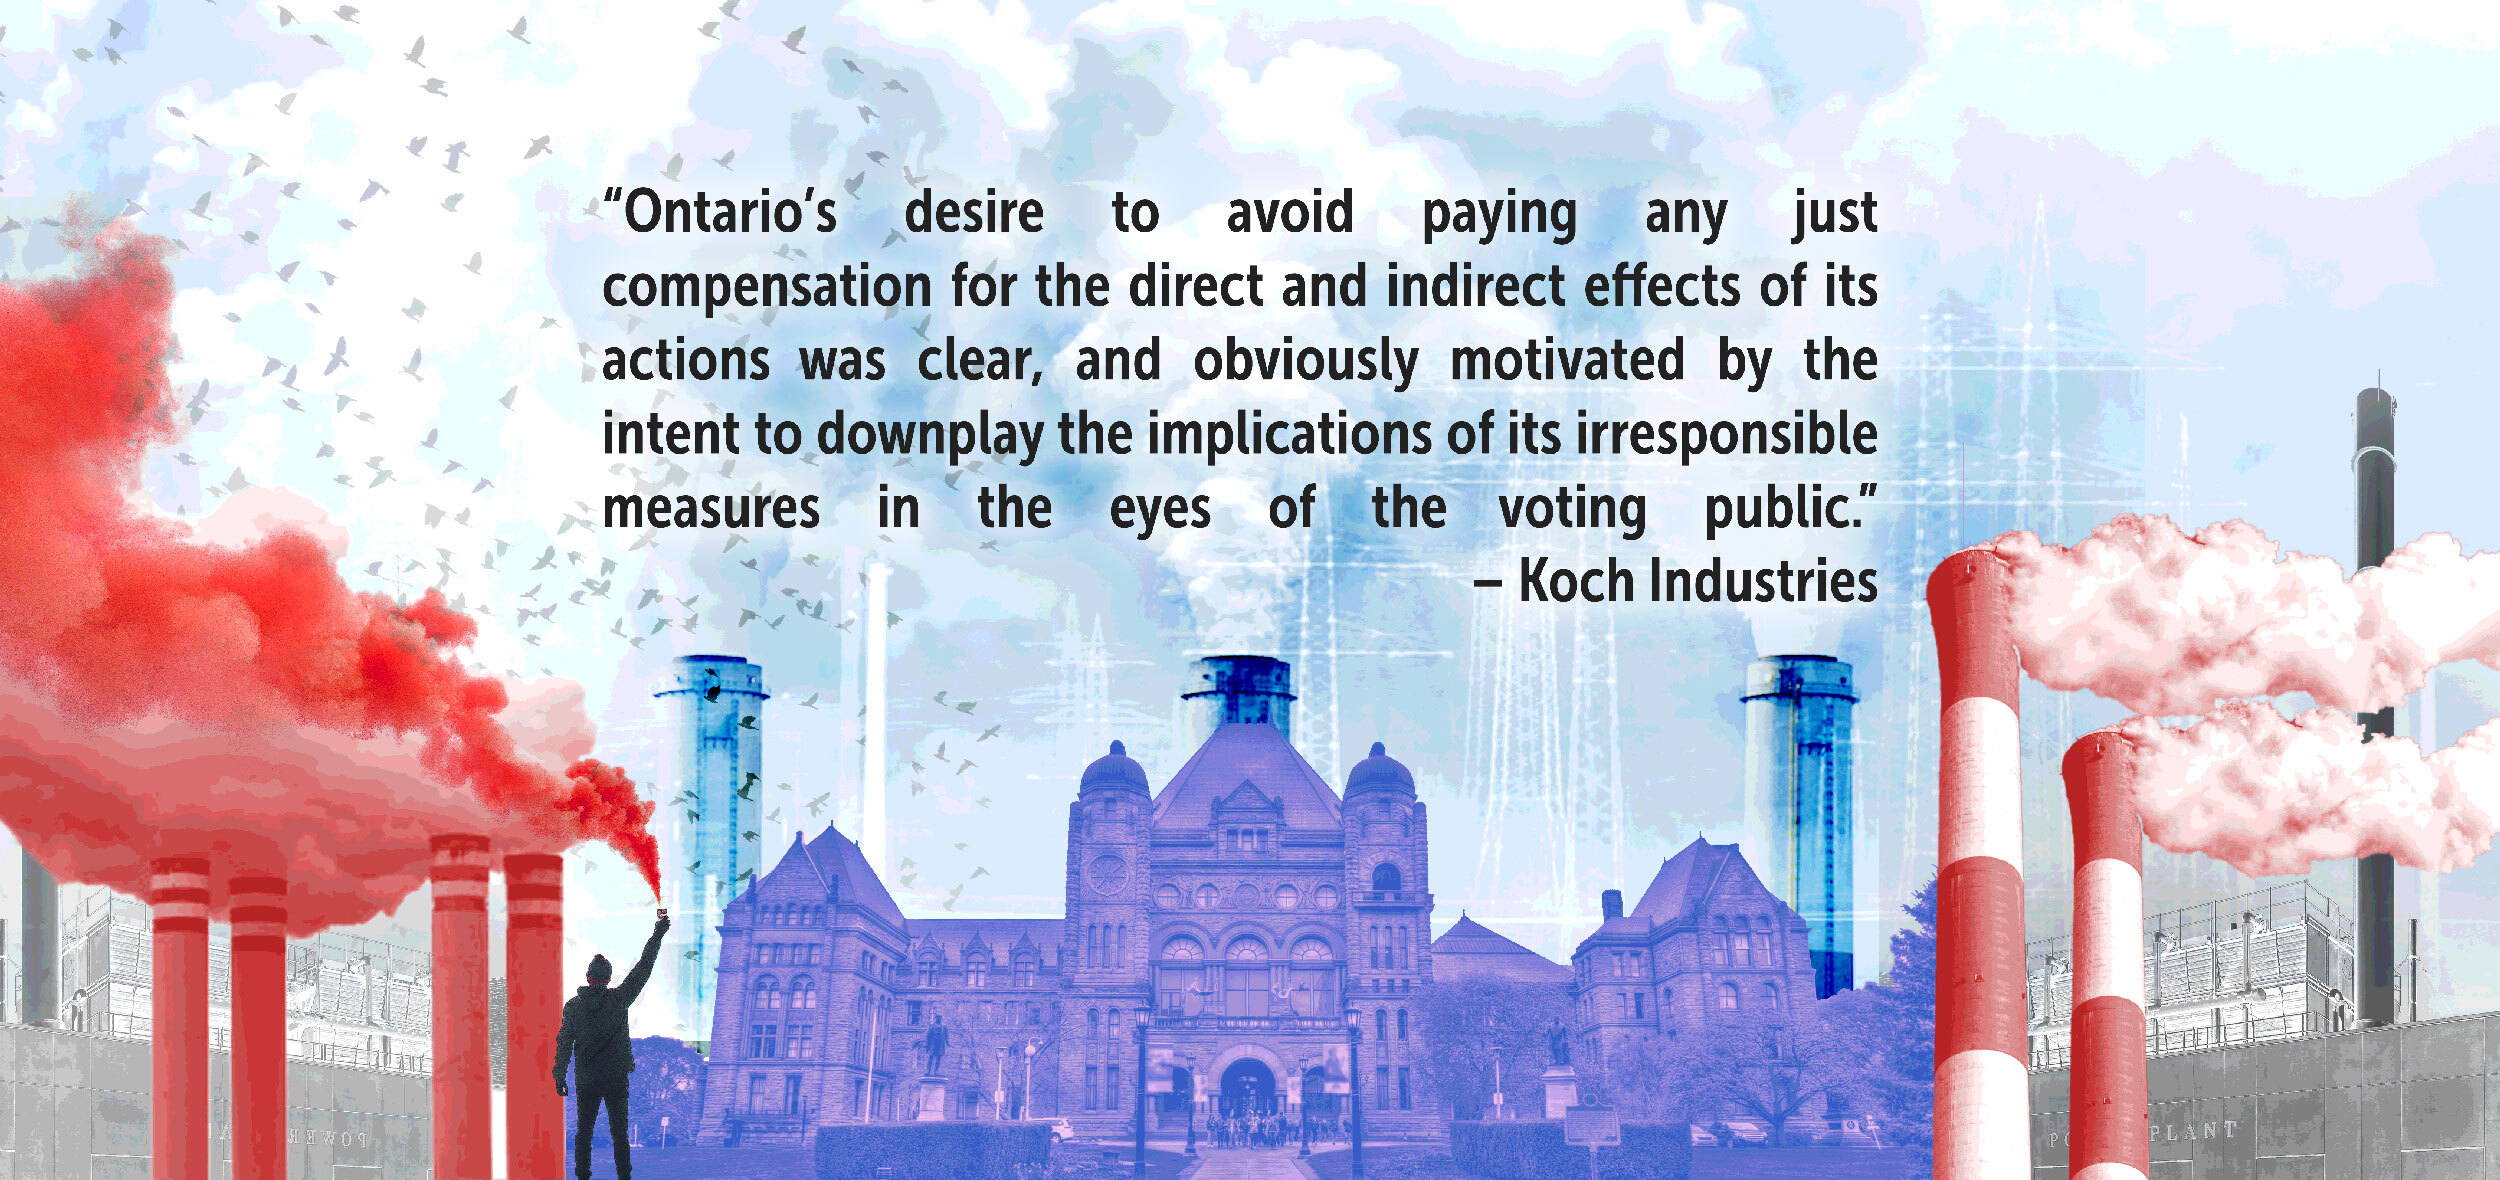 A large quote that reads "Ontario’s desire to avoid paying any just compensation for the direct and indirect effects of its actions was clear, and obviously motivated by the intent to downplay the implications of its irresponsible measures in the eyes of the voting public."